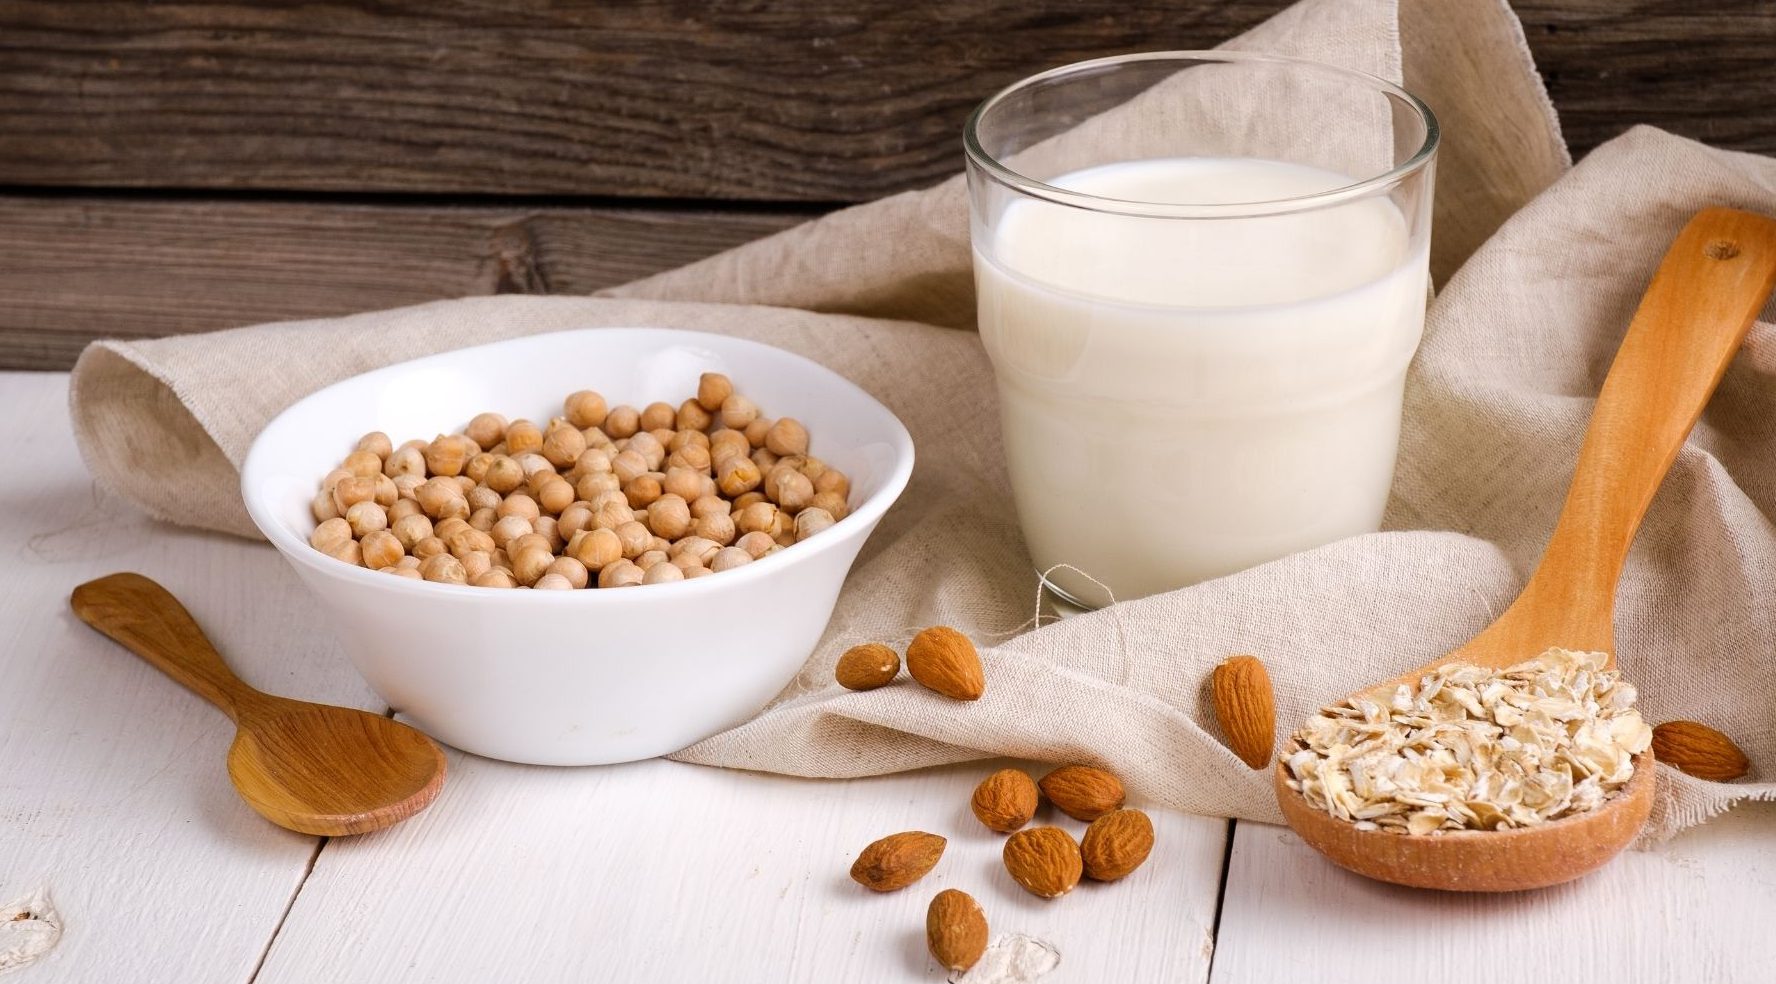 Global Milk Substitutes (Non Dairy Milk) Market Outlook, Opportunities And Strategies – Includes Non Dairy Milk Market